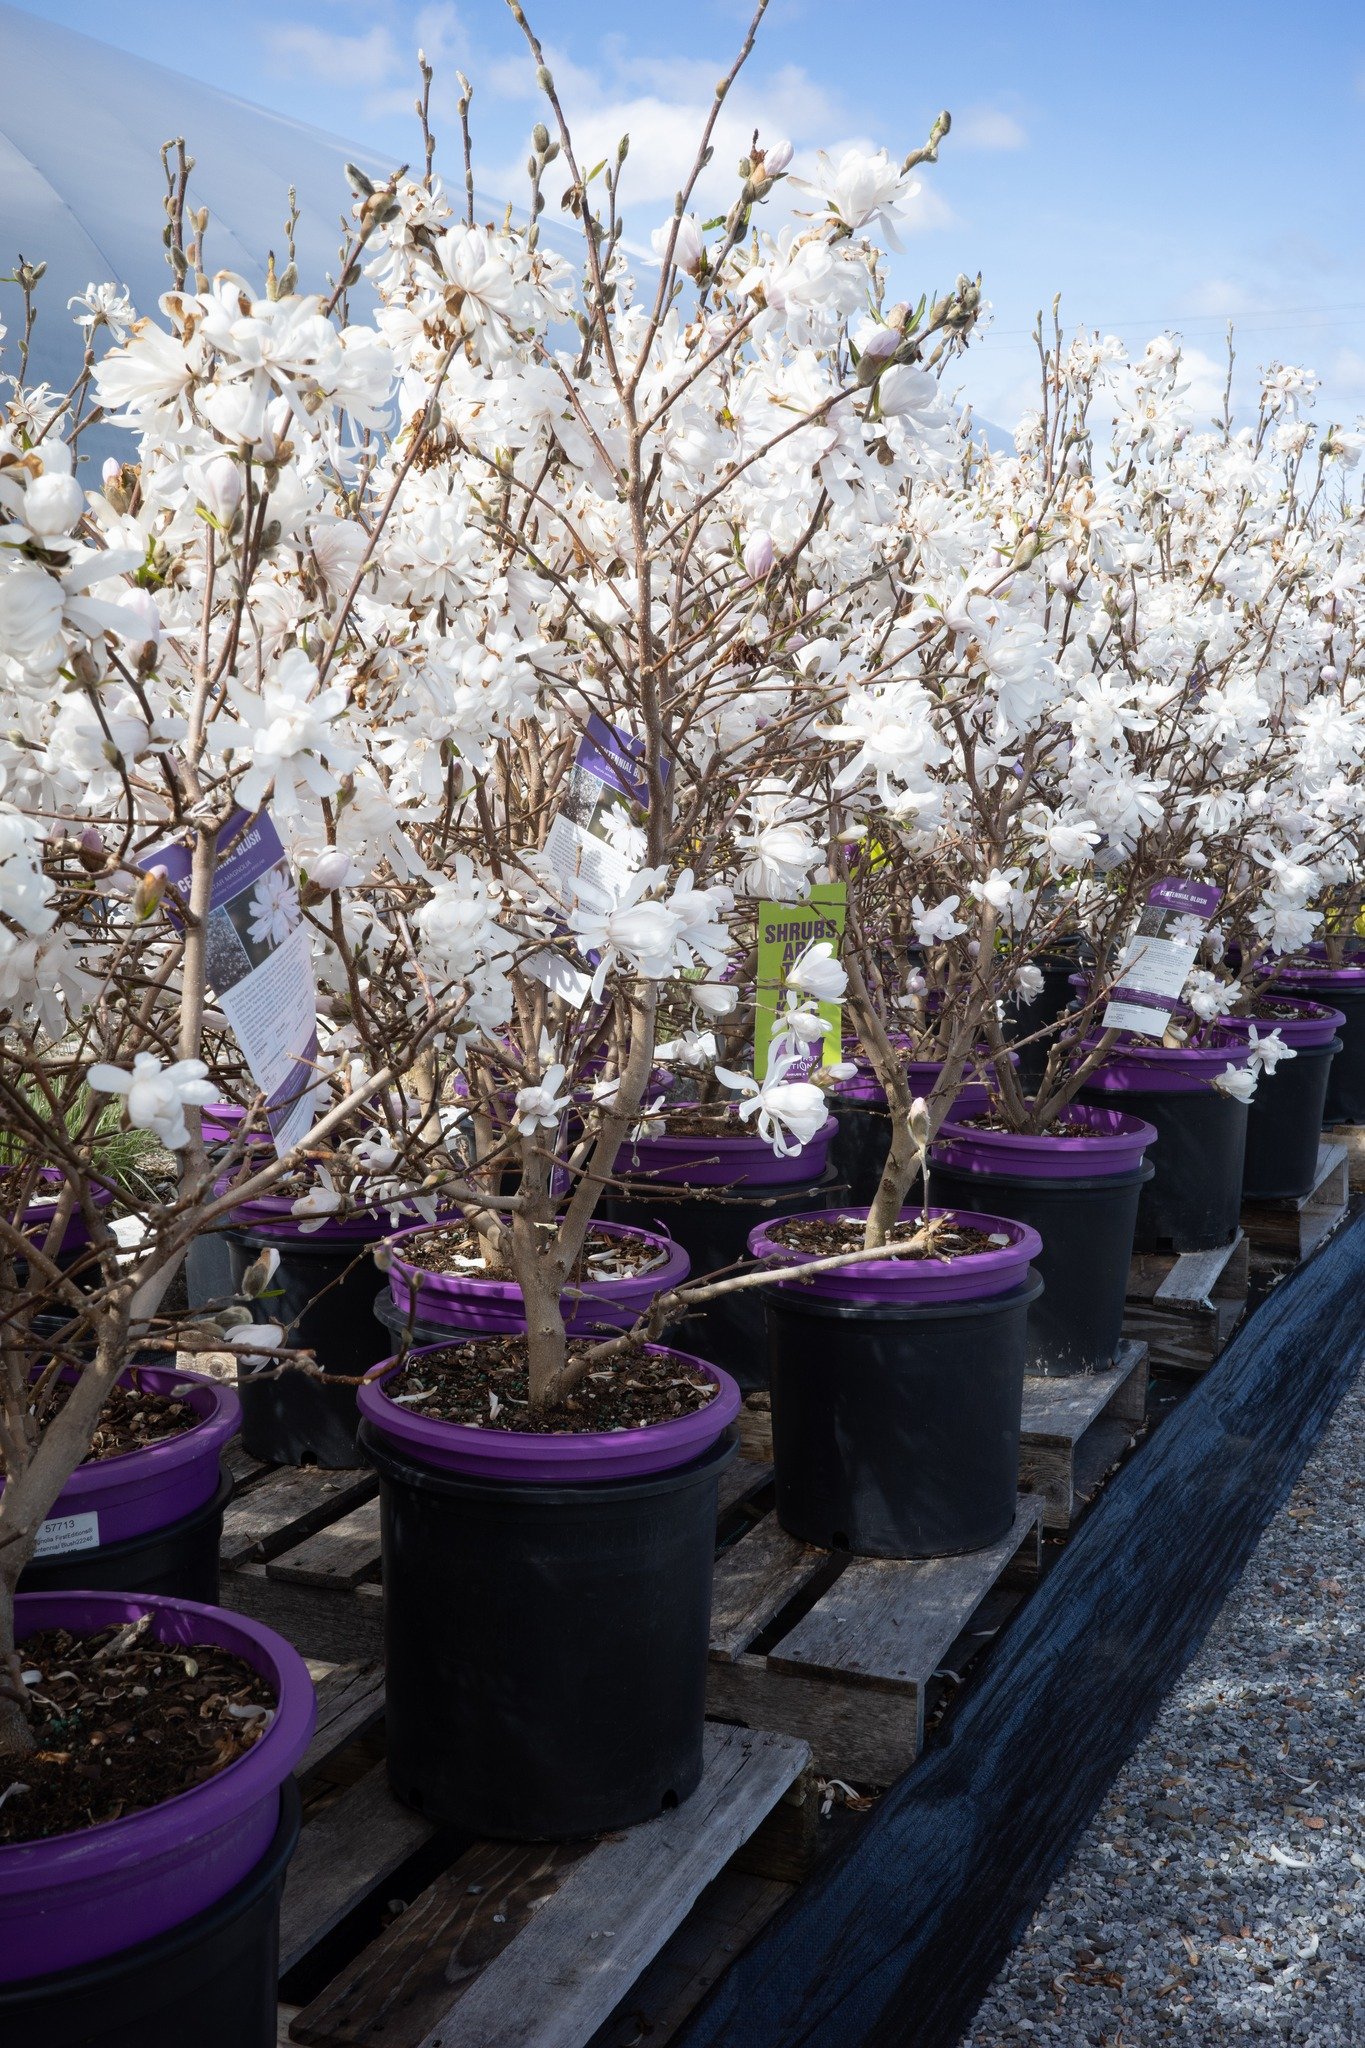 Thinking of a more permanent alternative to the hanging basket for this mother's day? You can always go with a Centennial Magnolia with it's showy white blooms - or maybe you need a zip of color for that shady spot with a PJM Rhododendron? If you can